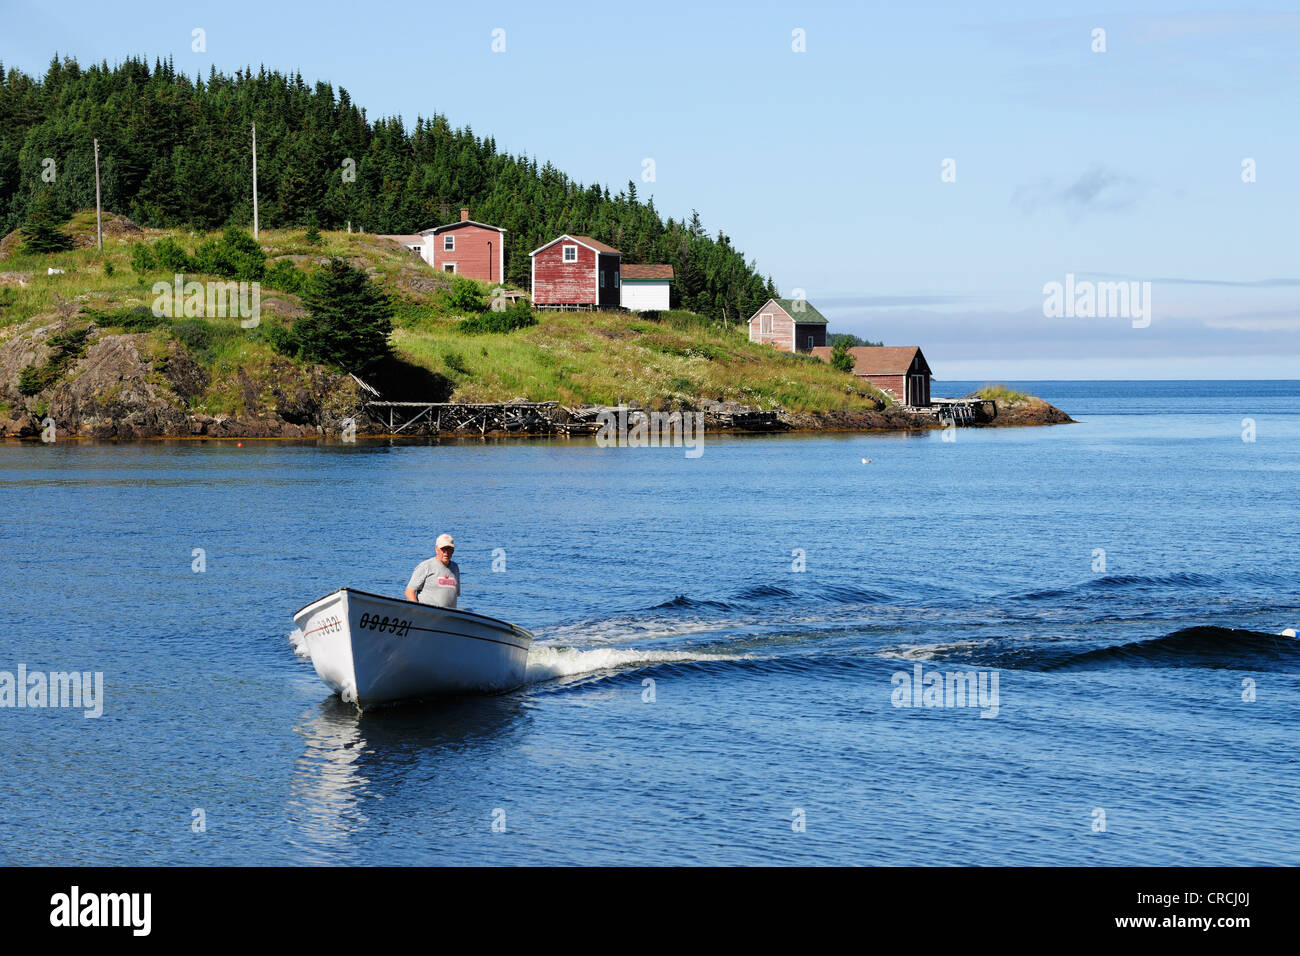 Fisherman returning in his boat after fishing, near Twillingate, Newfoundland, Canada, North America Stock Photo